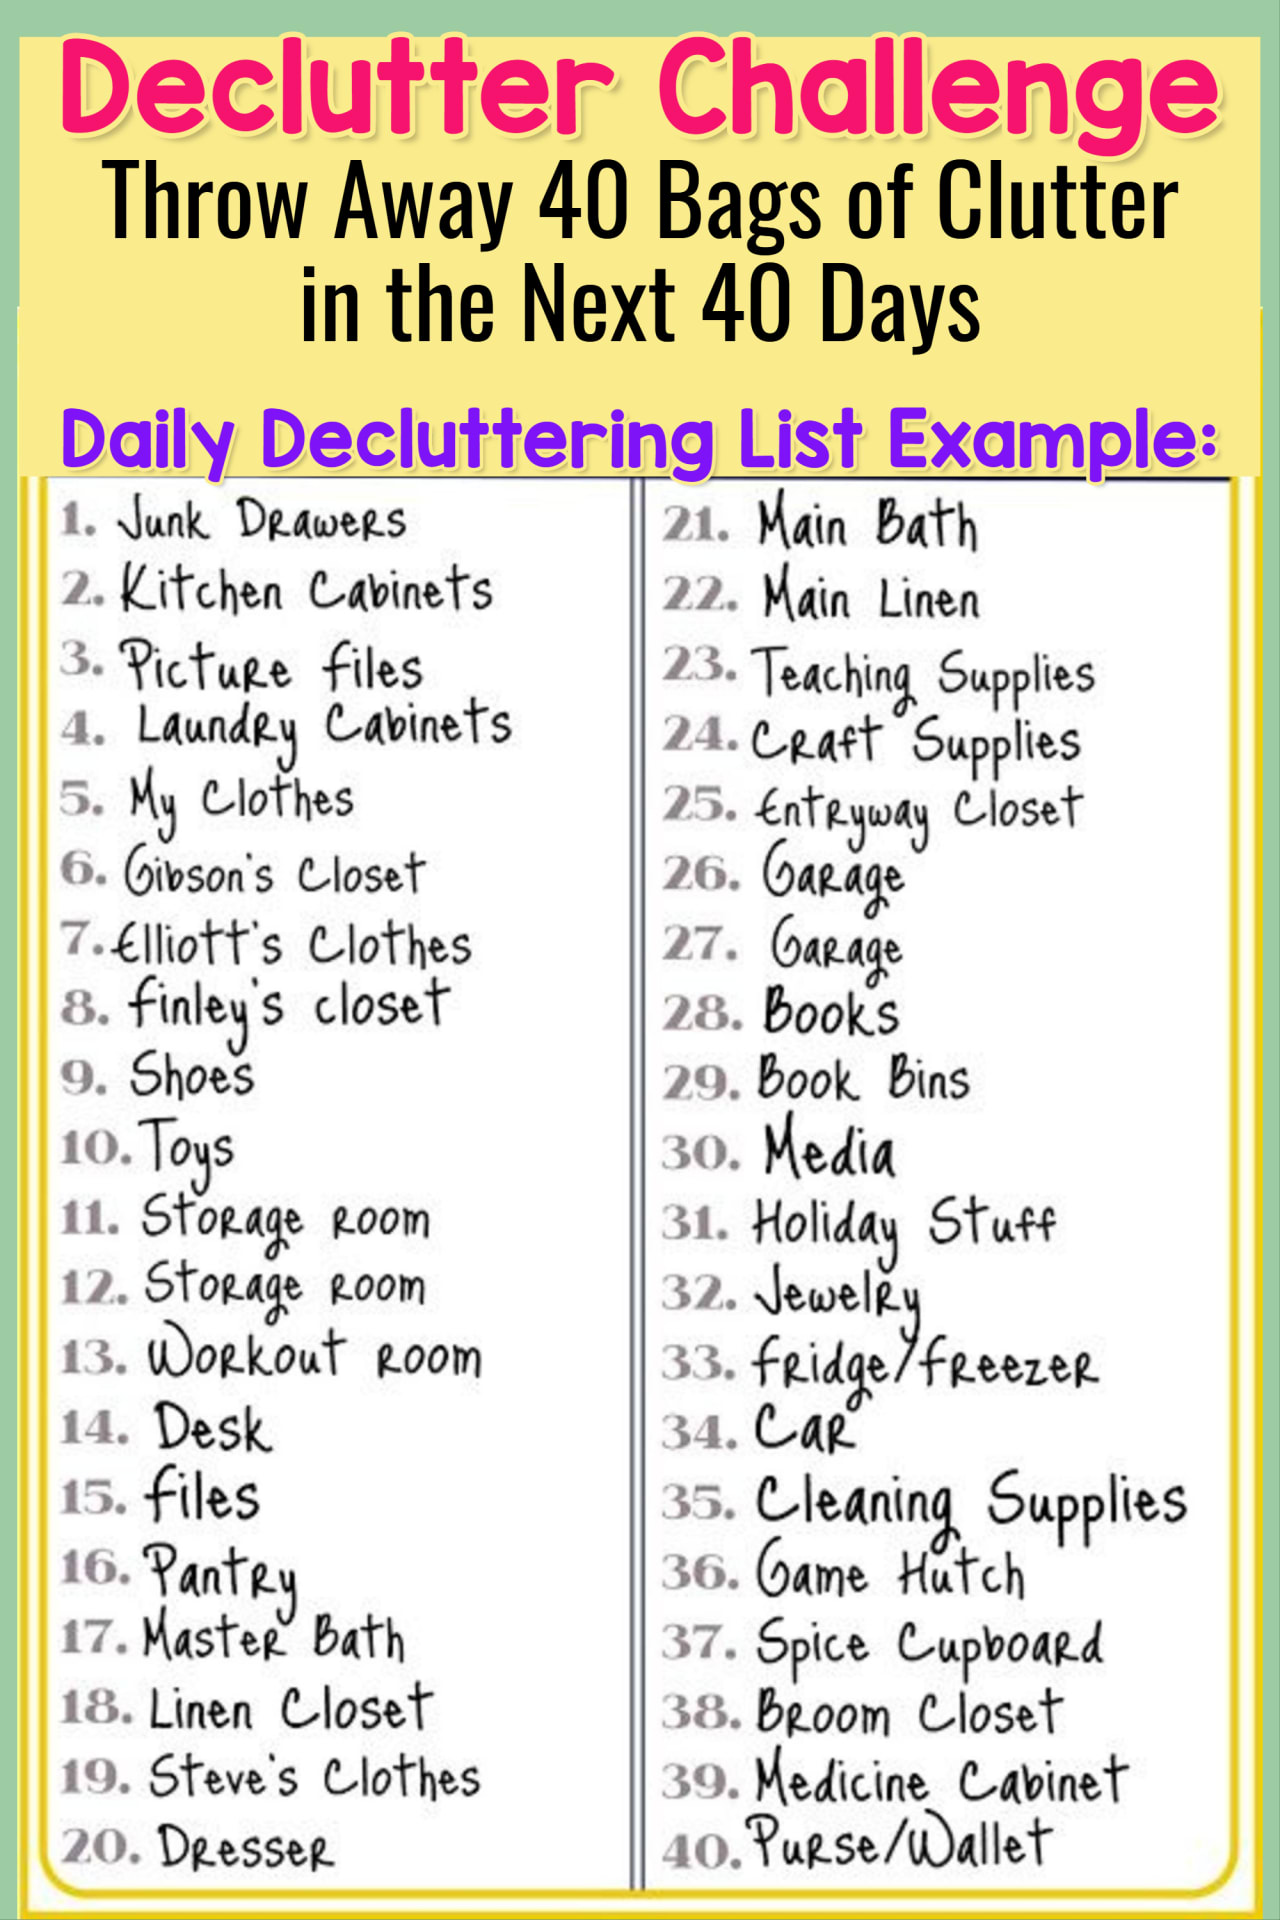 Daily decluttering schedule for a daily decluttering challenge - Decluttering room by room to UNclutter your home - where to START cleaning a messy house with these easy decluttering tips - if you're feeling overwhelmed by clutter in your messy house try these organization hacks to declutter and organize your home - declutter and organize checklist